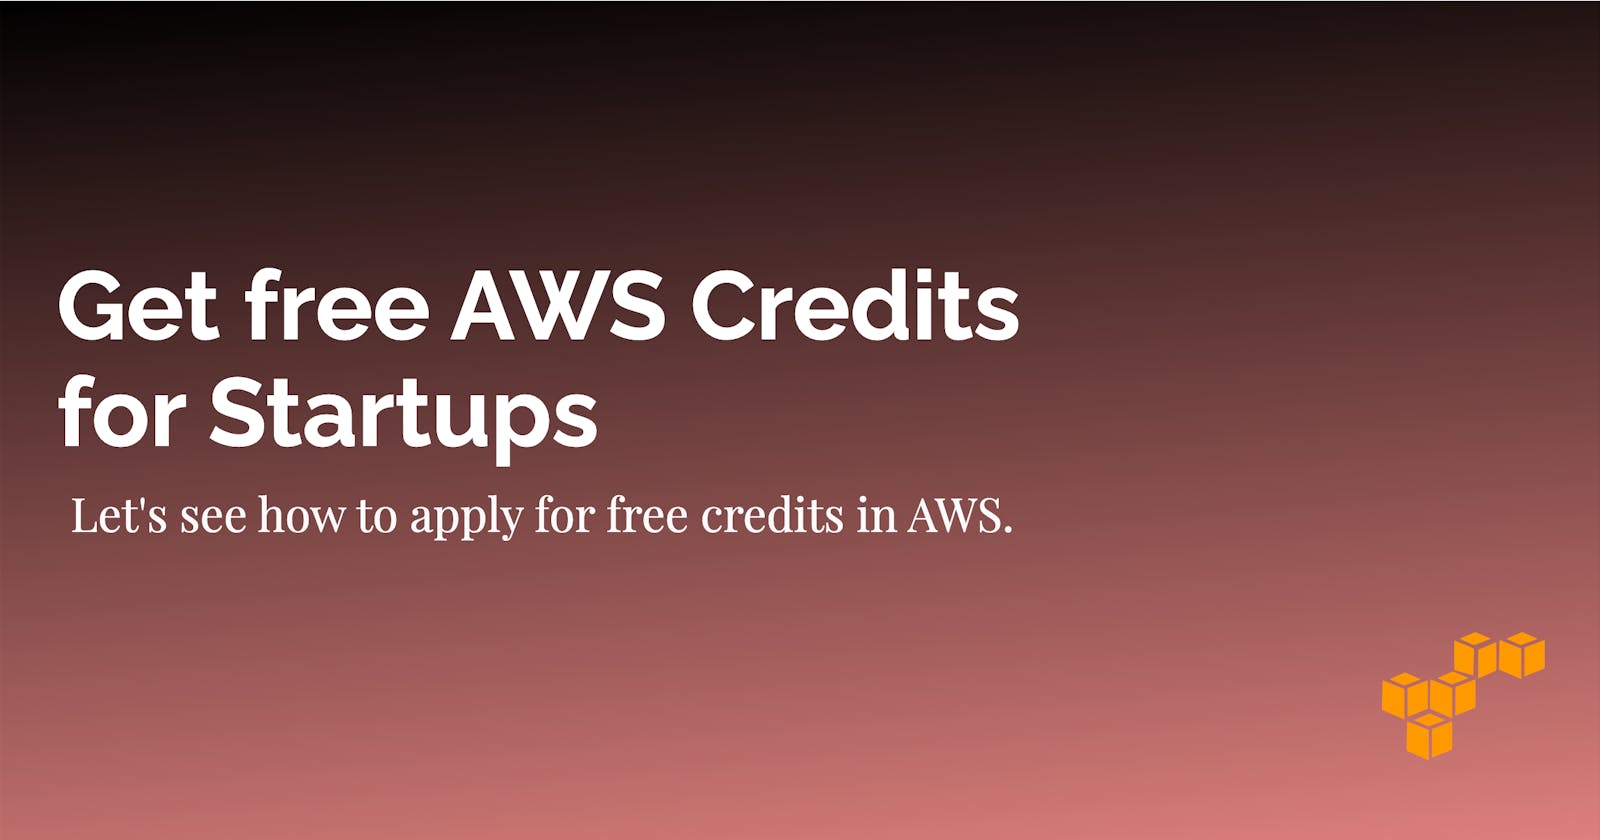 Get free AWS Credits for Startups